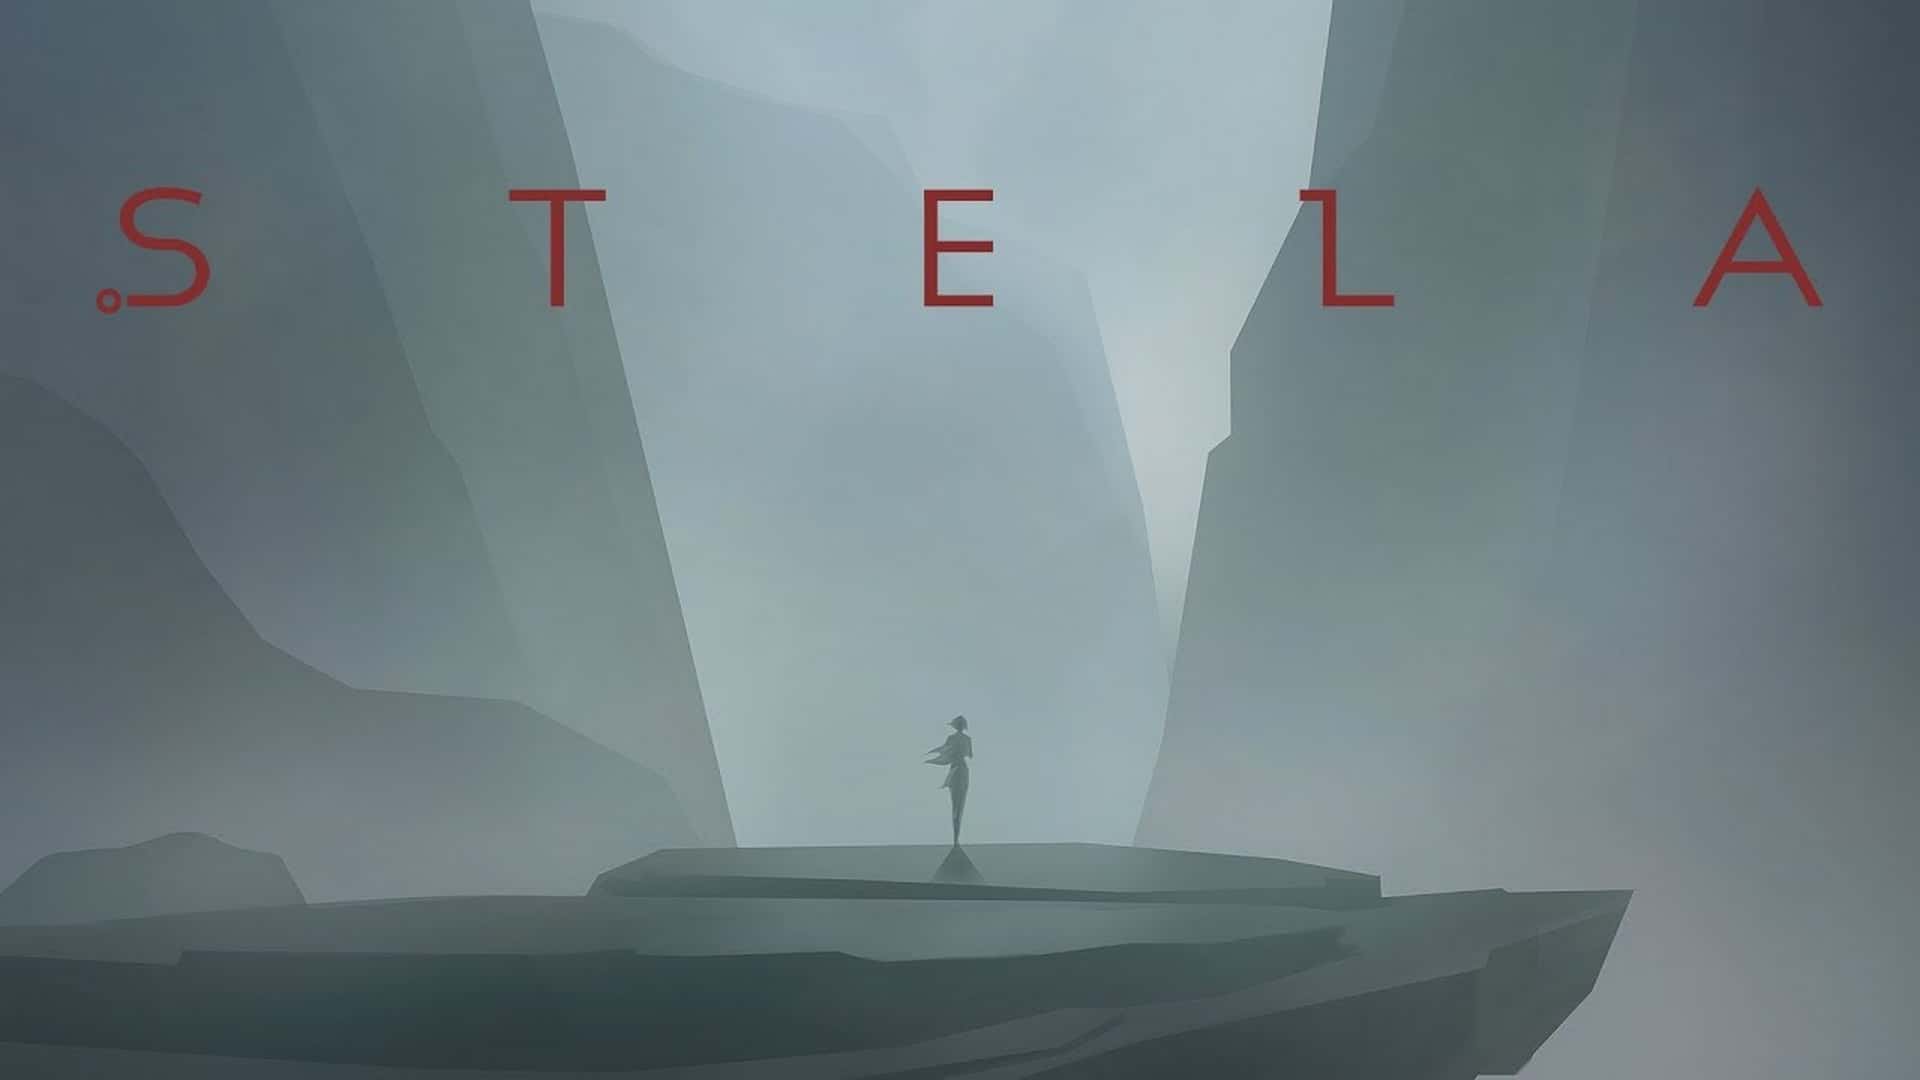 Halo Infinite Co-Developers Launch Stela on Xbox One Today